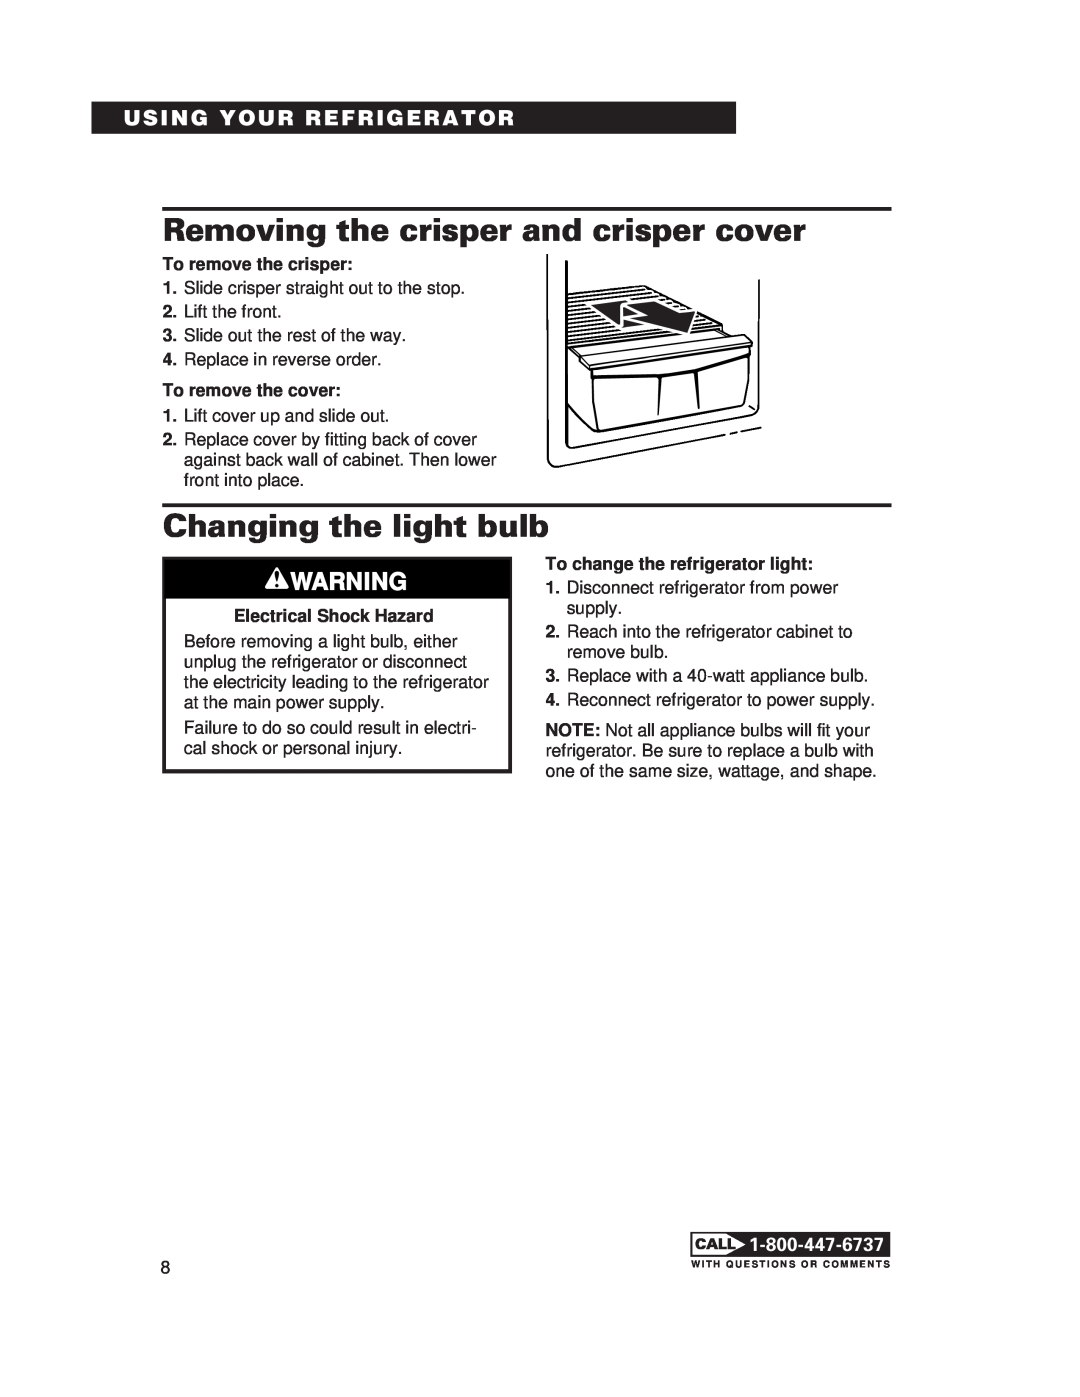 Whirlpool 1-34850/4390527 warranty Removing the crisper and crisper cover, Changing the light bulb, Using Your Refrigerator 